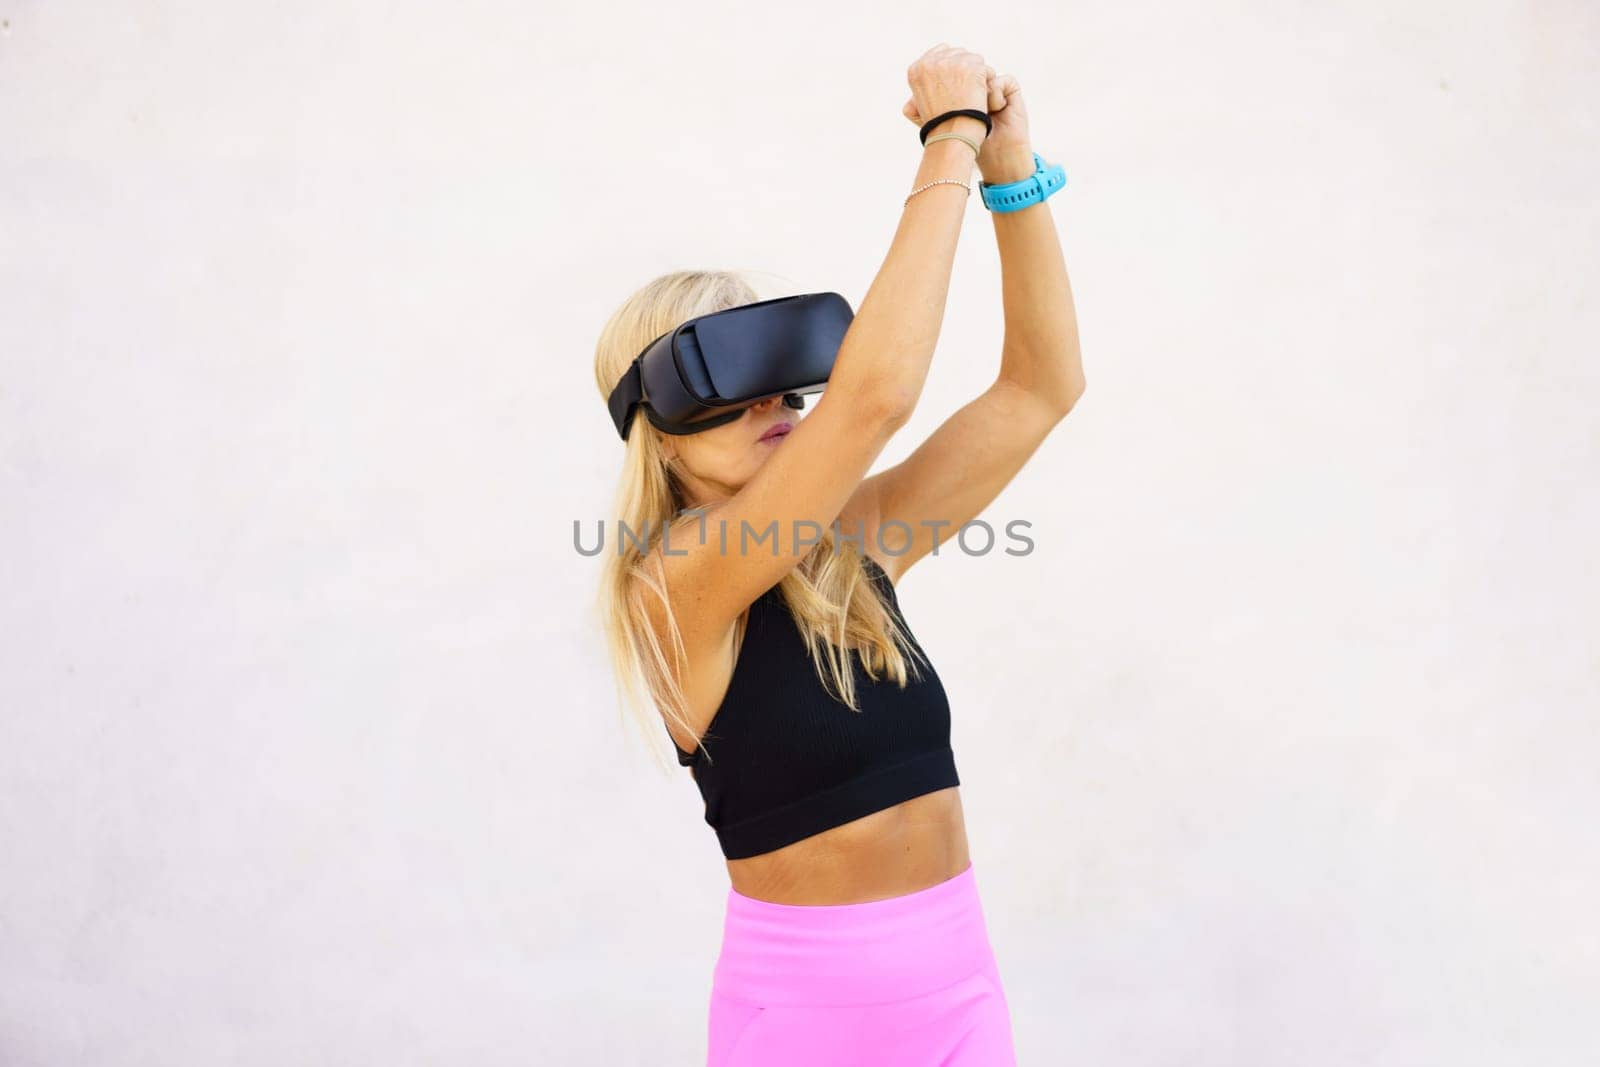 Sportswoman in VR headset raising hands while playing videogame by javiindy